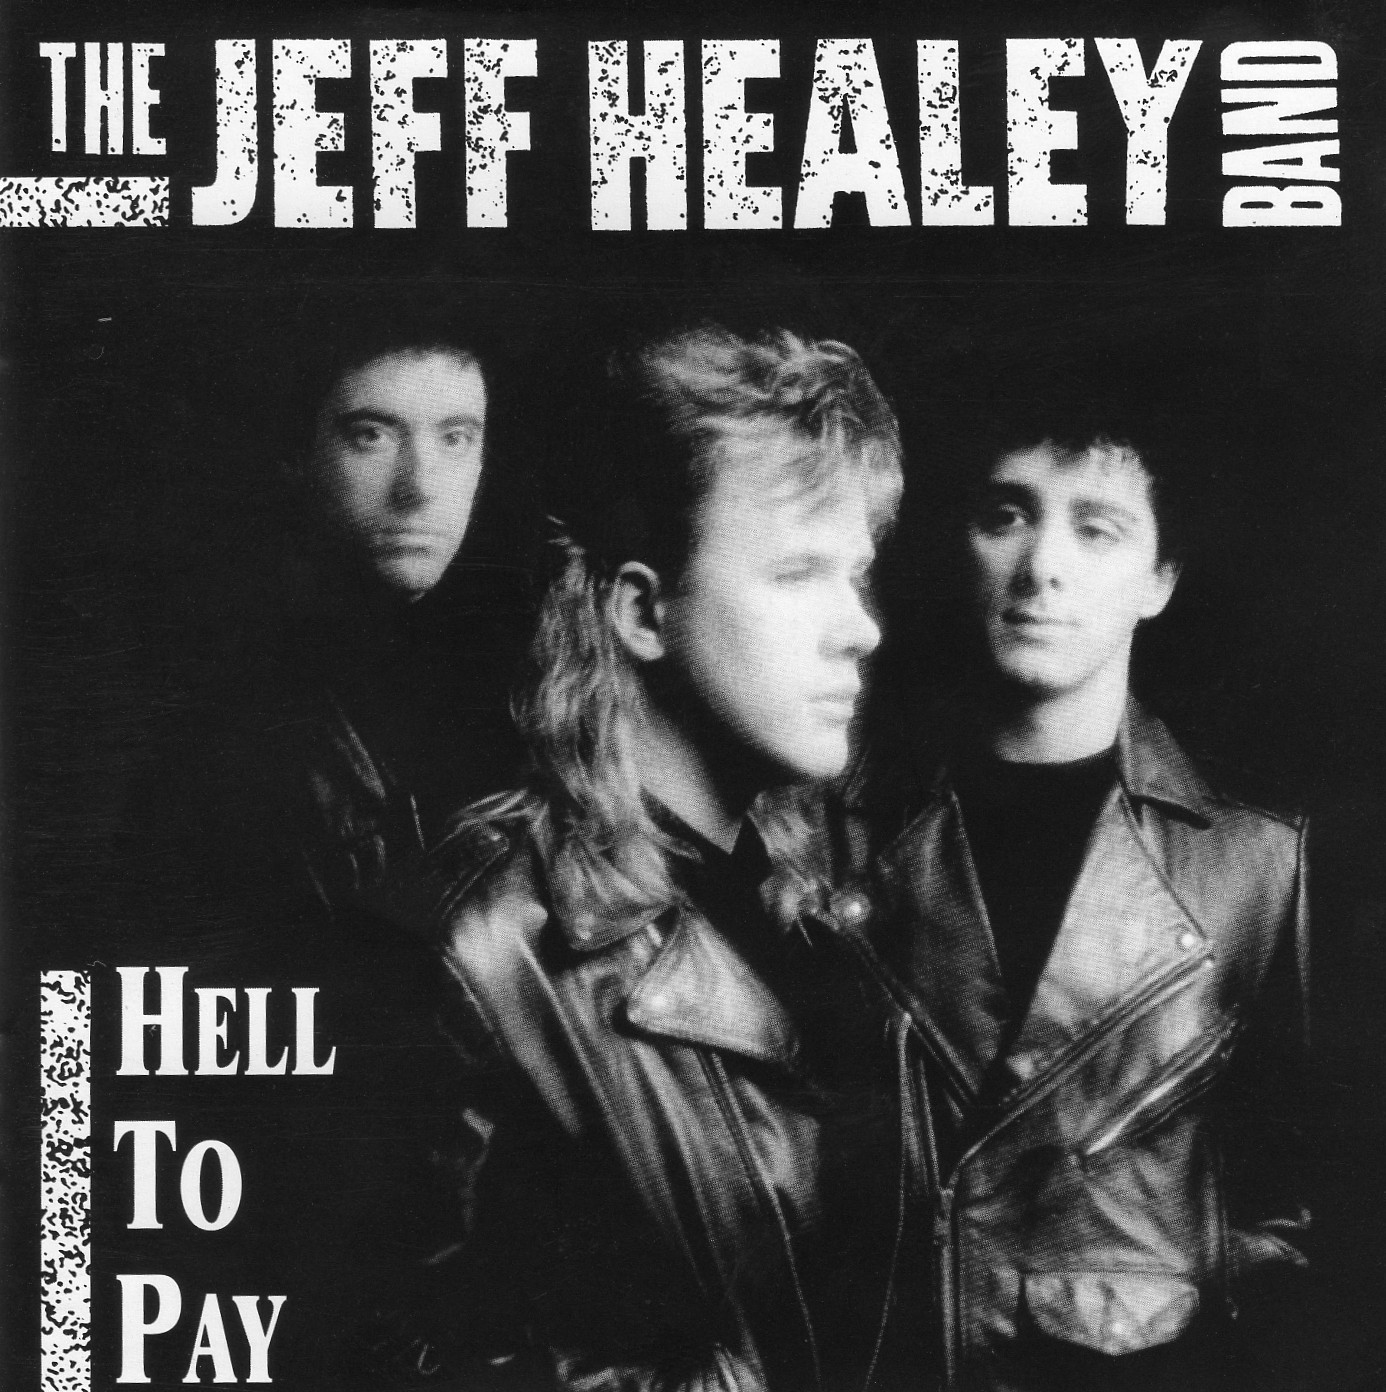 Jeff Healey (Band) - Collection (1985 - 2020)